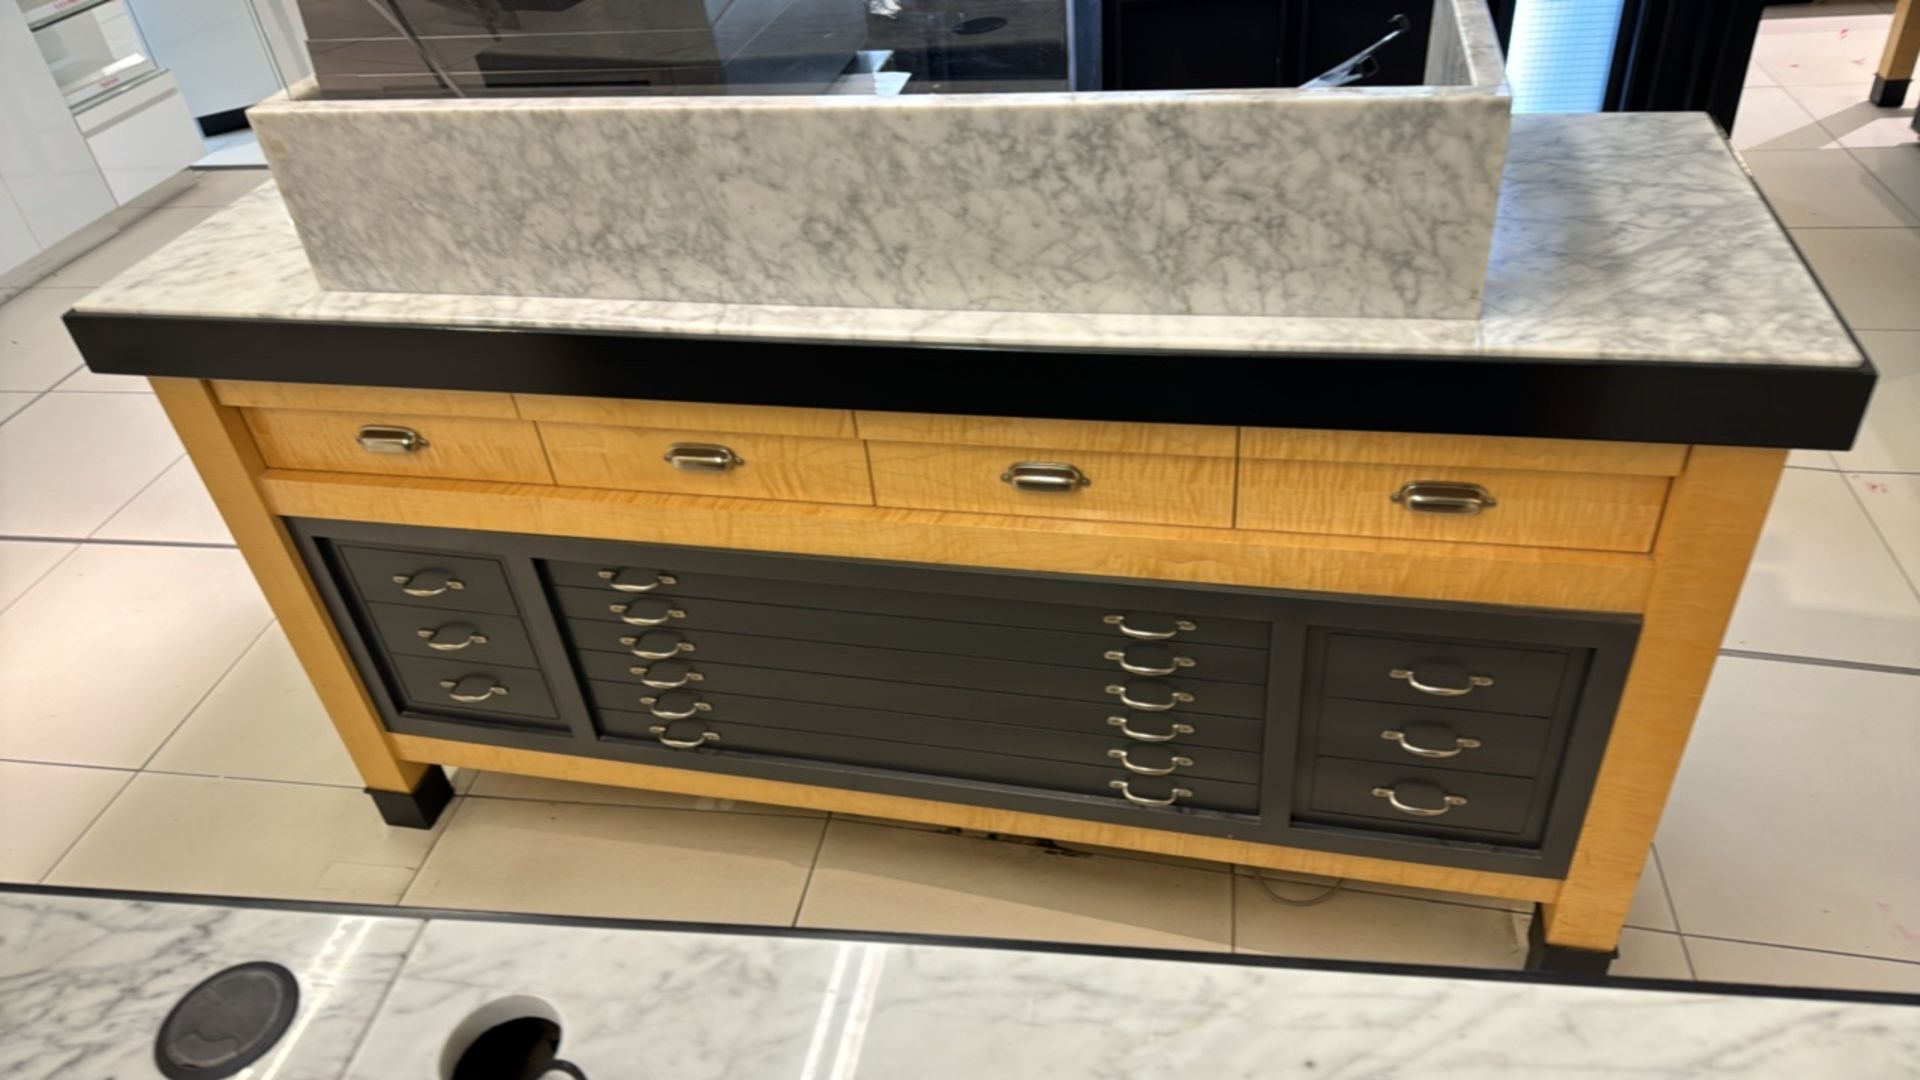 Wooden Table Display with Marble Top and Storage Drawers - Image 2 of 4